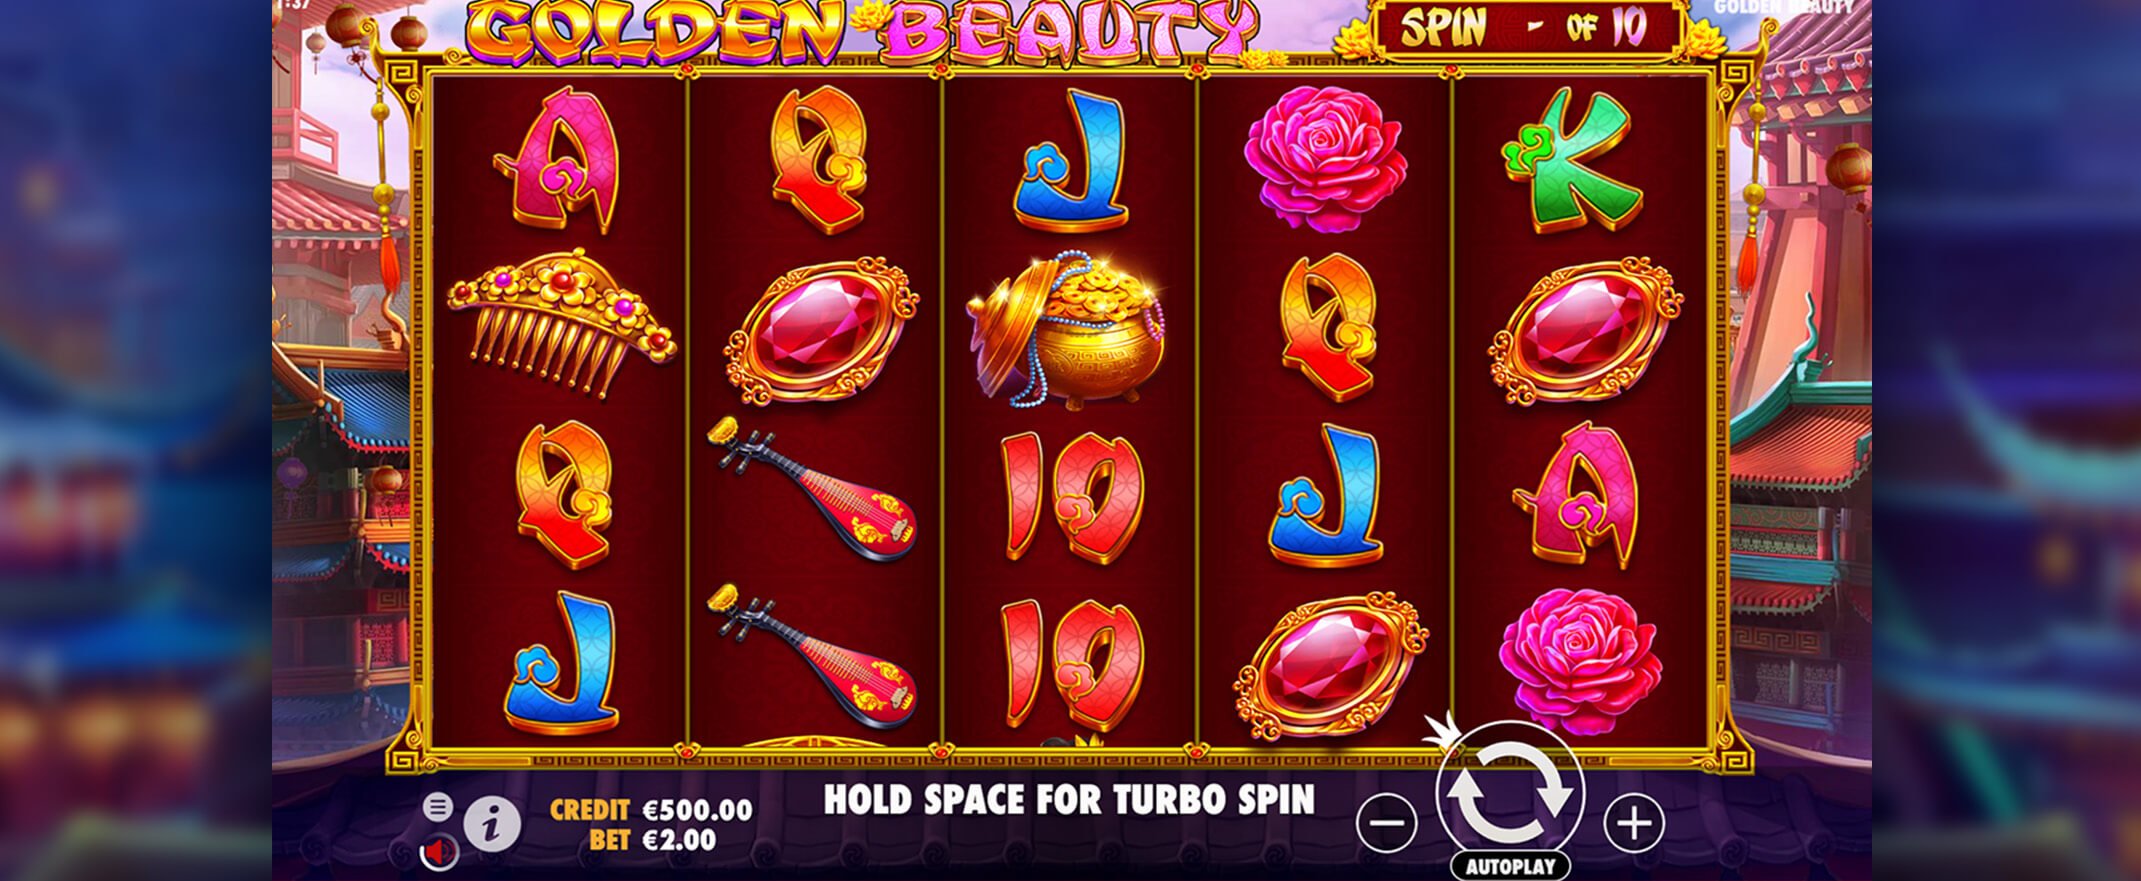 Golden Beauty slot review - image of the reels and symbols